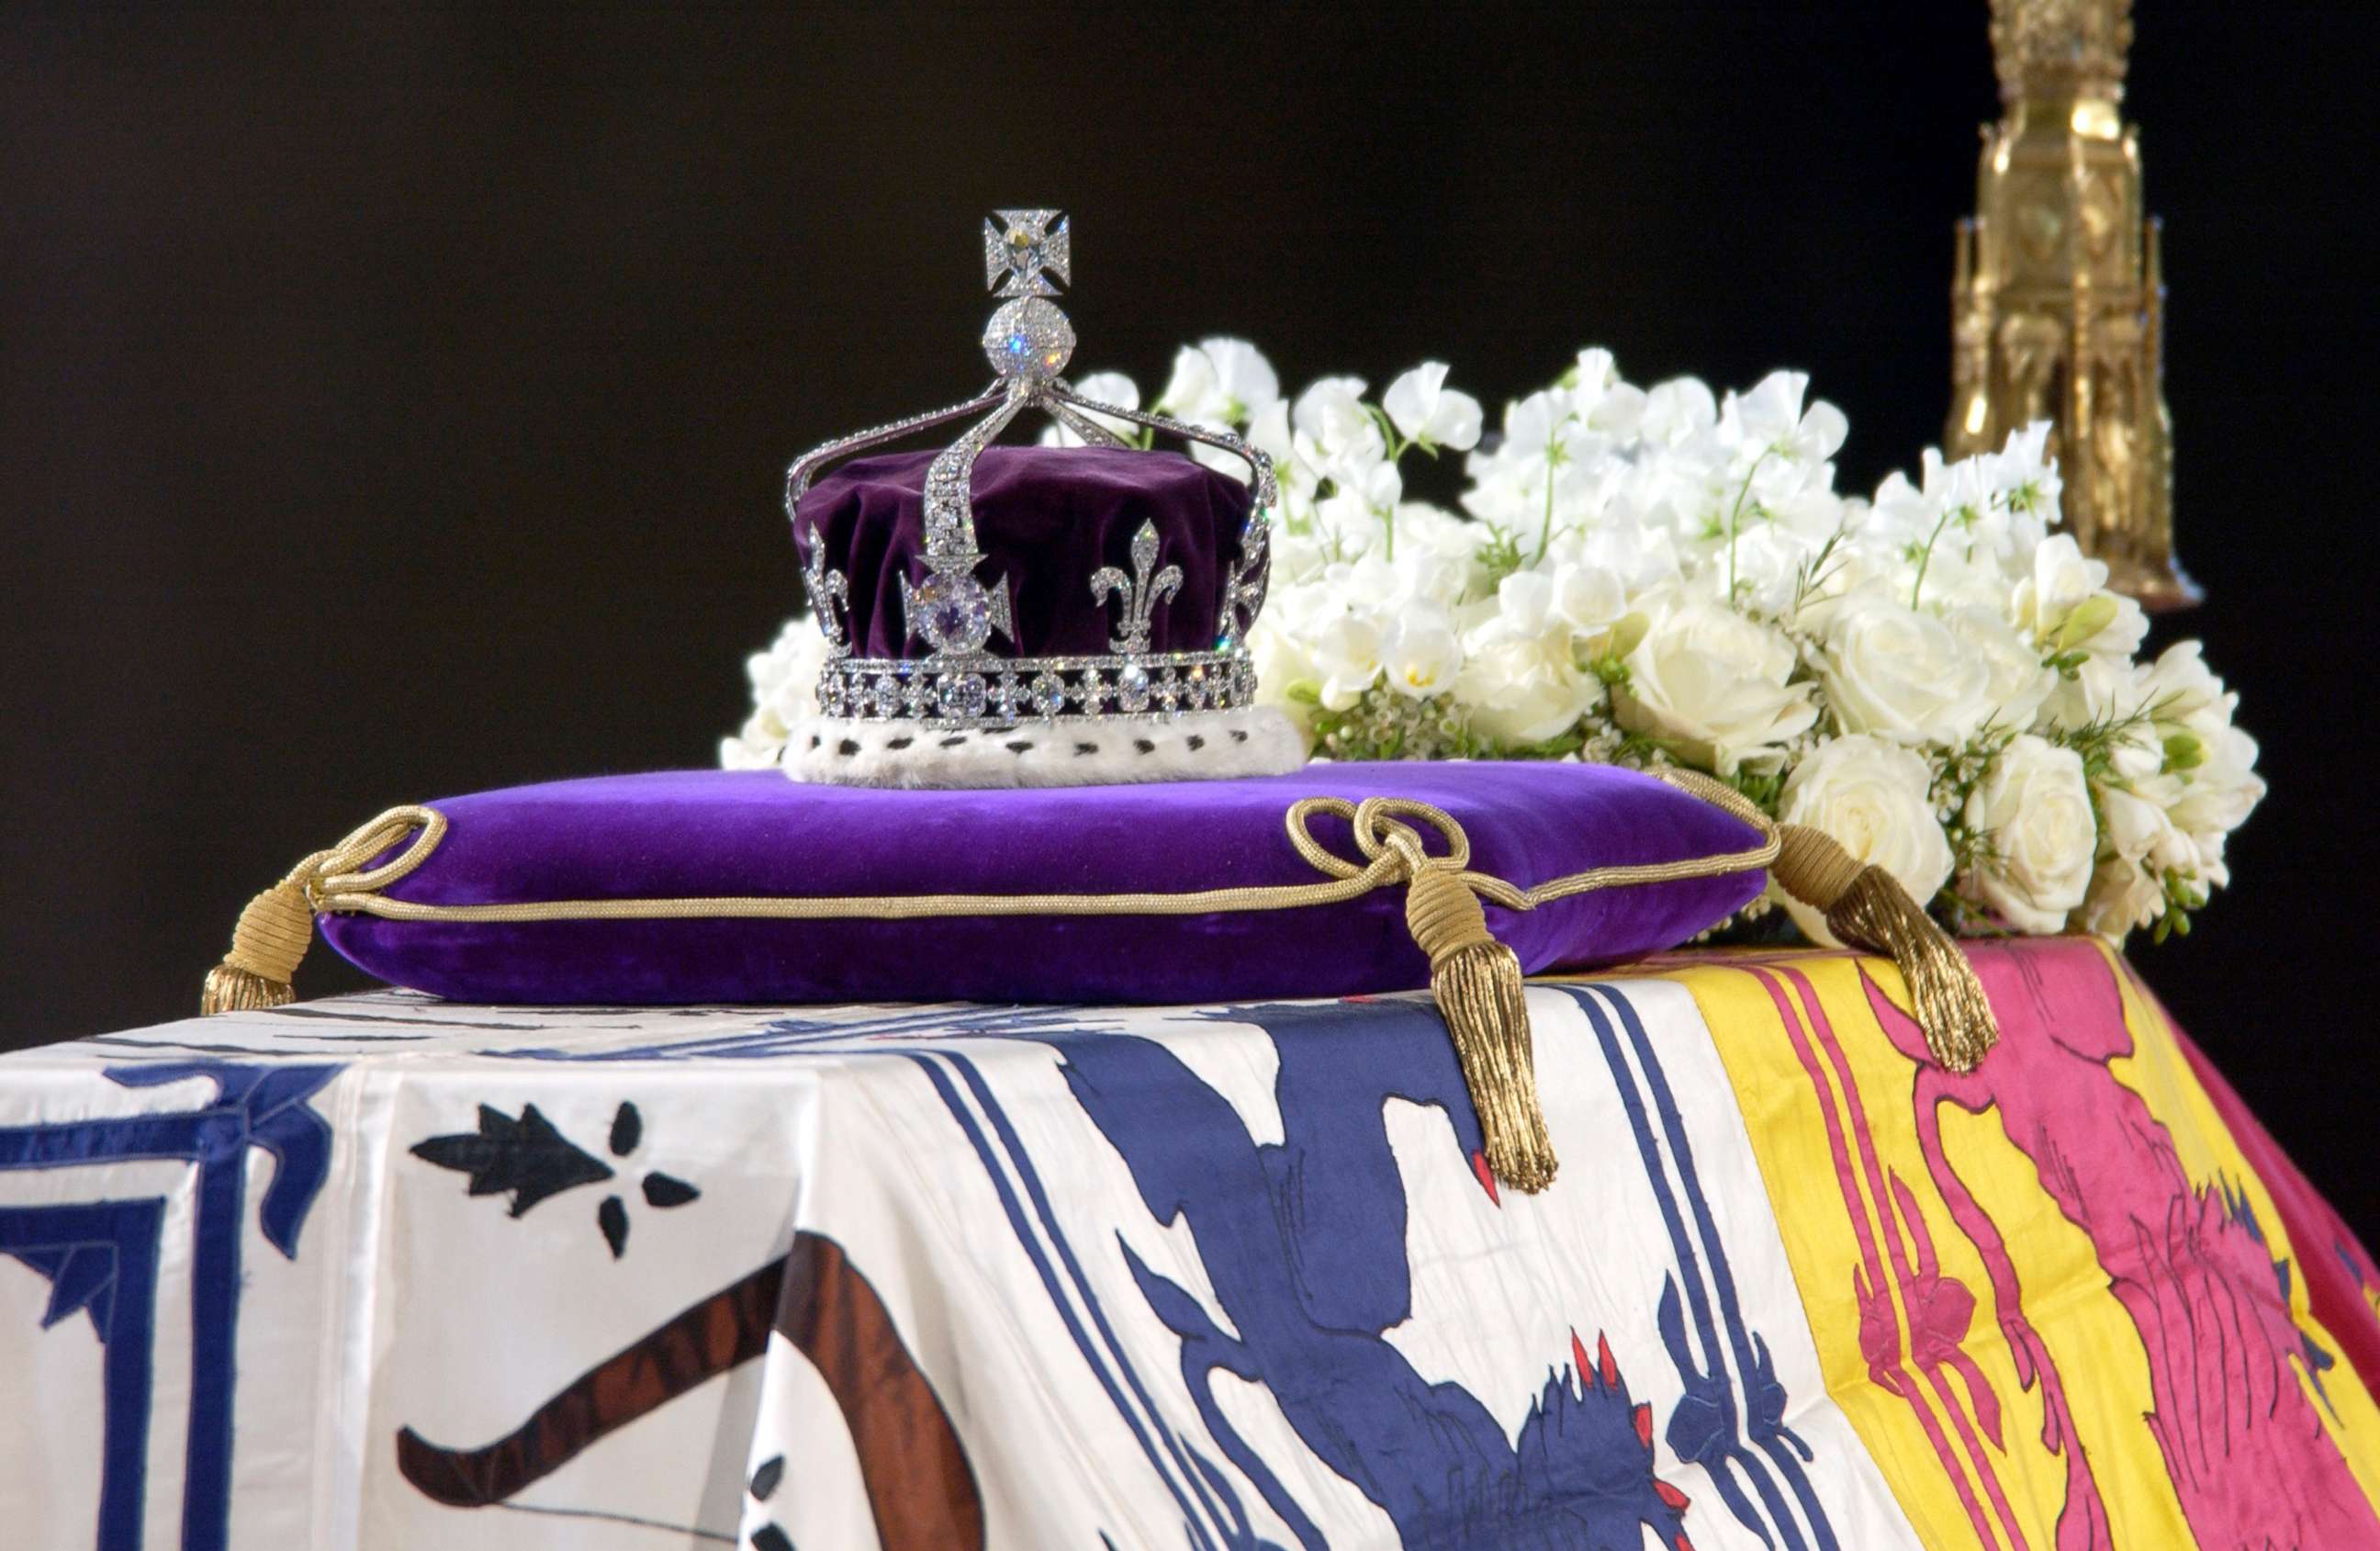 PHOTO: The Queen Mother's coronation crown with the priceless Koh-I-Noor diamond rests atop the Queen Mother's coffin.